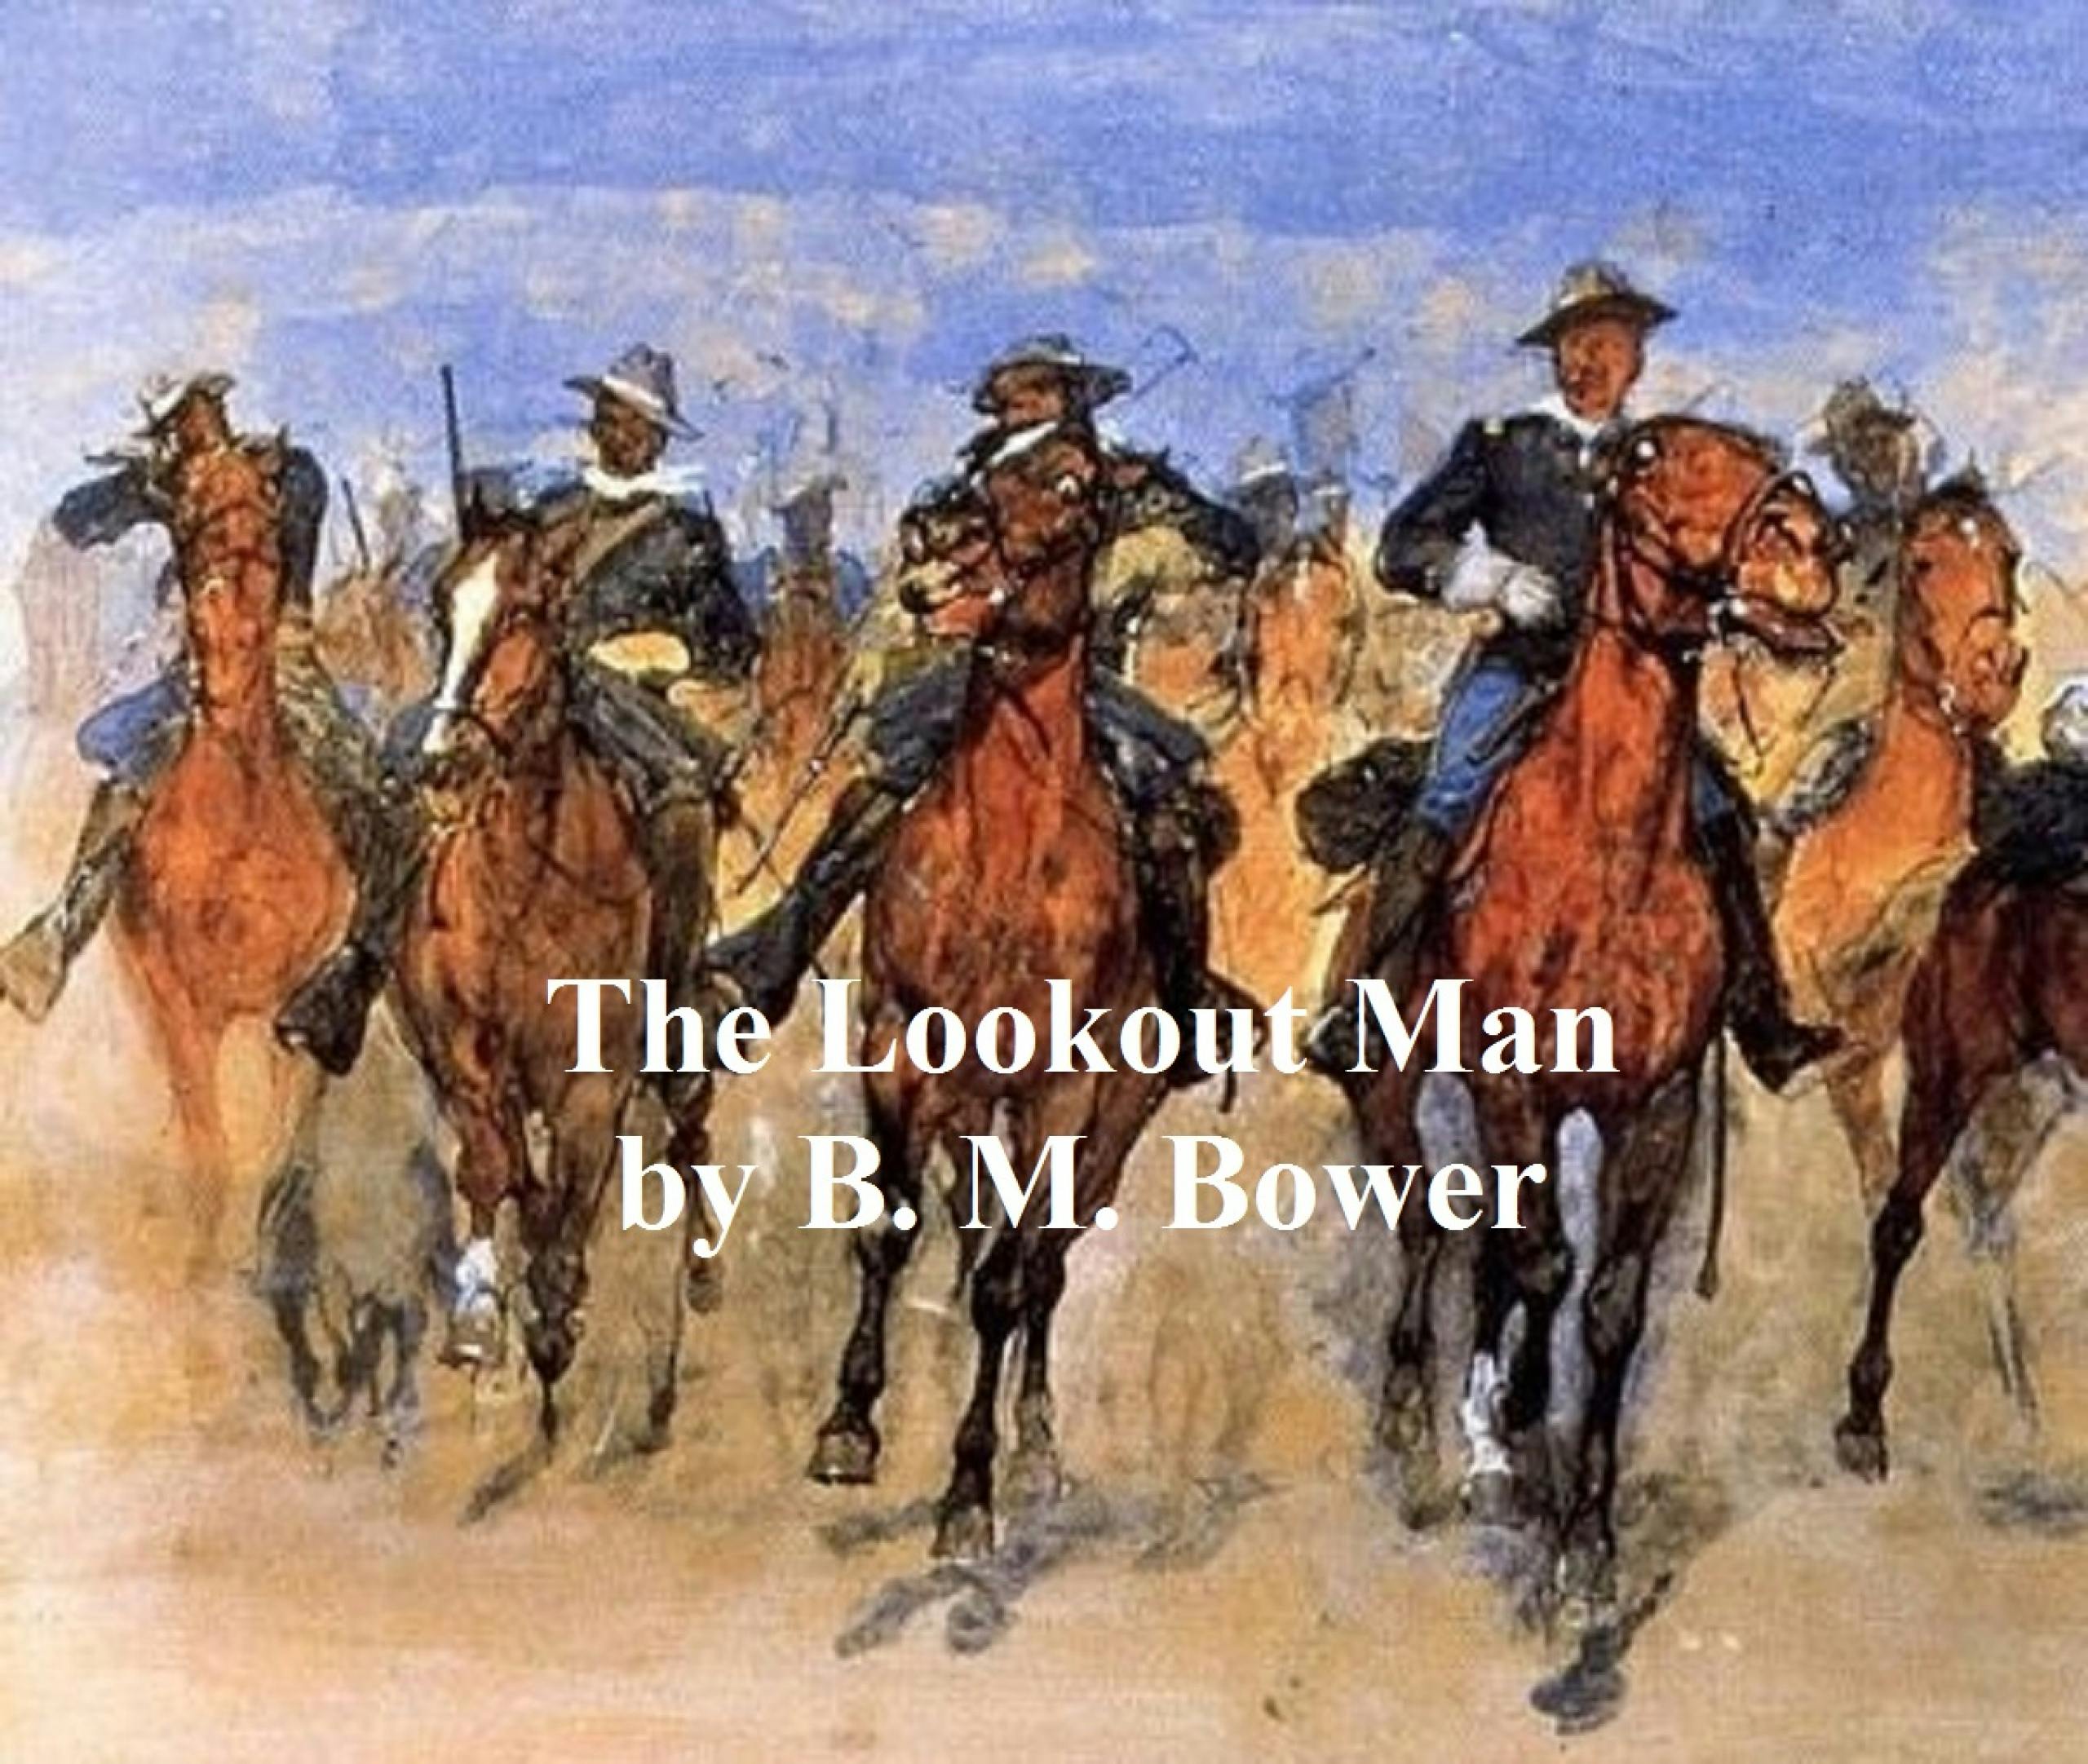 The Lookout Man - B. M. Bower